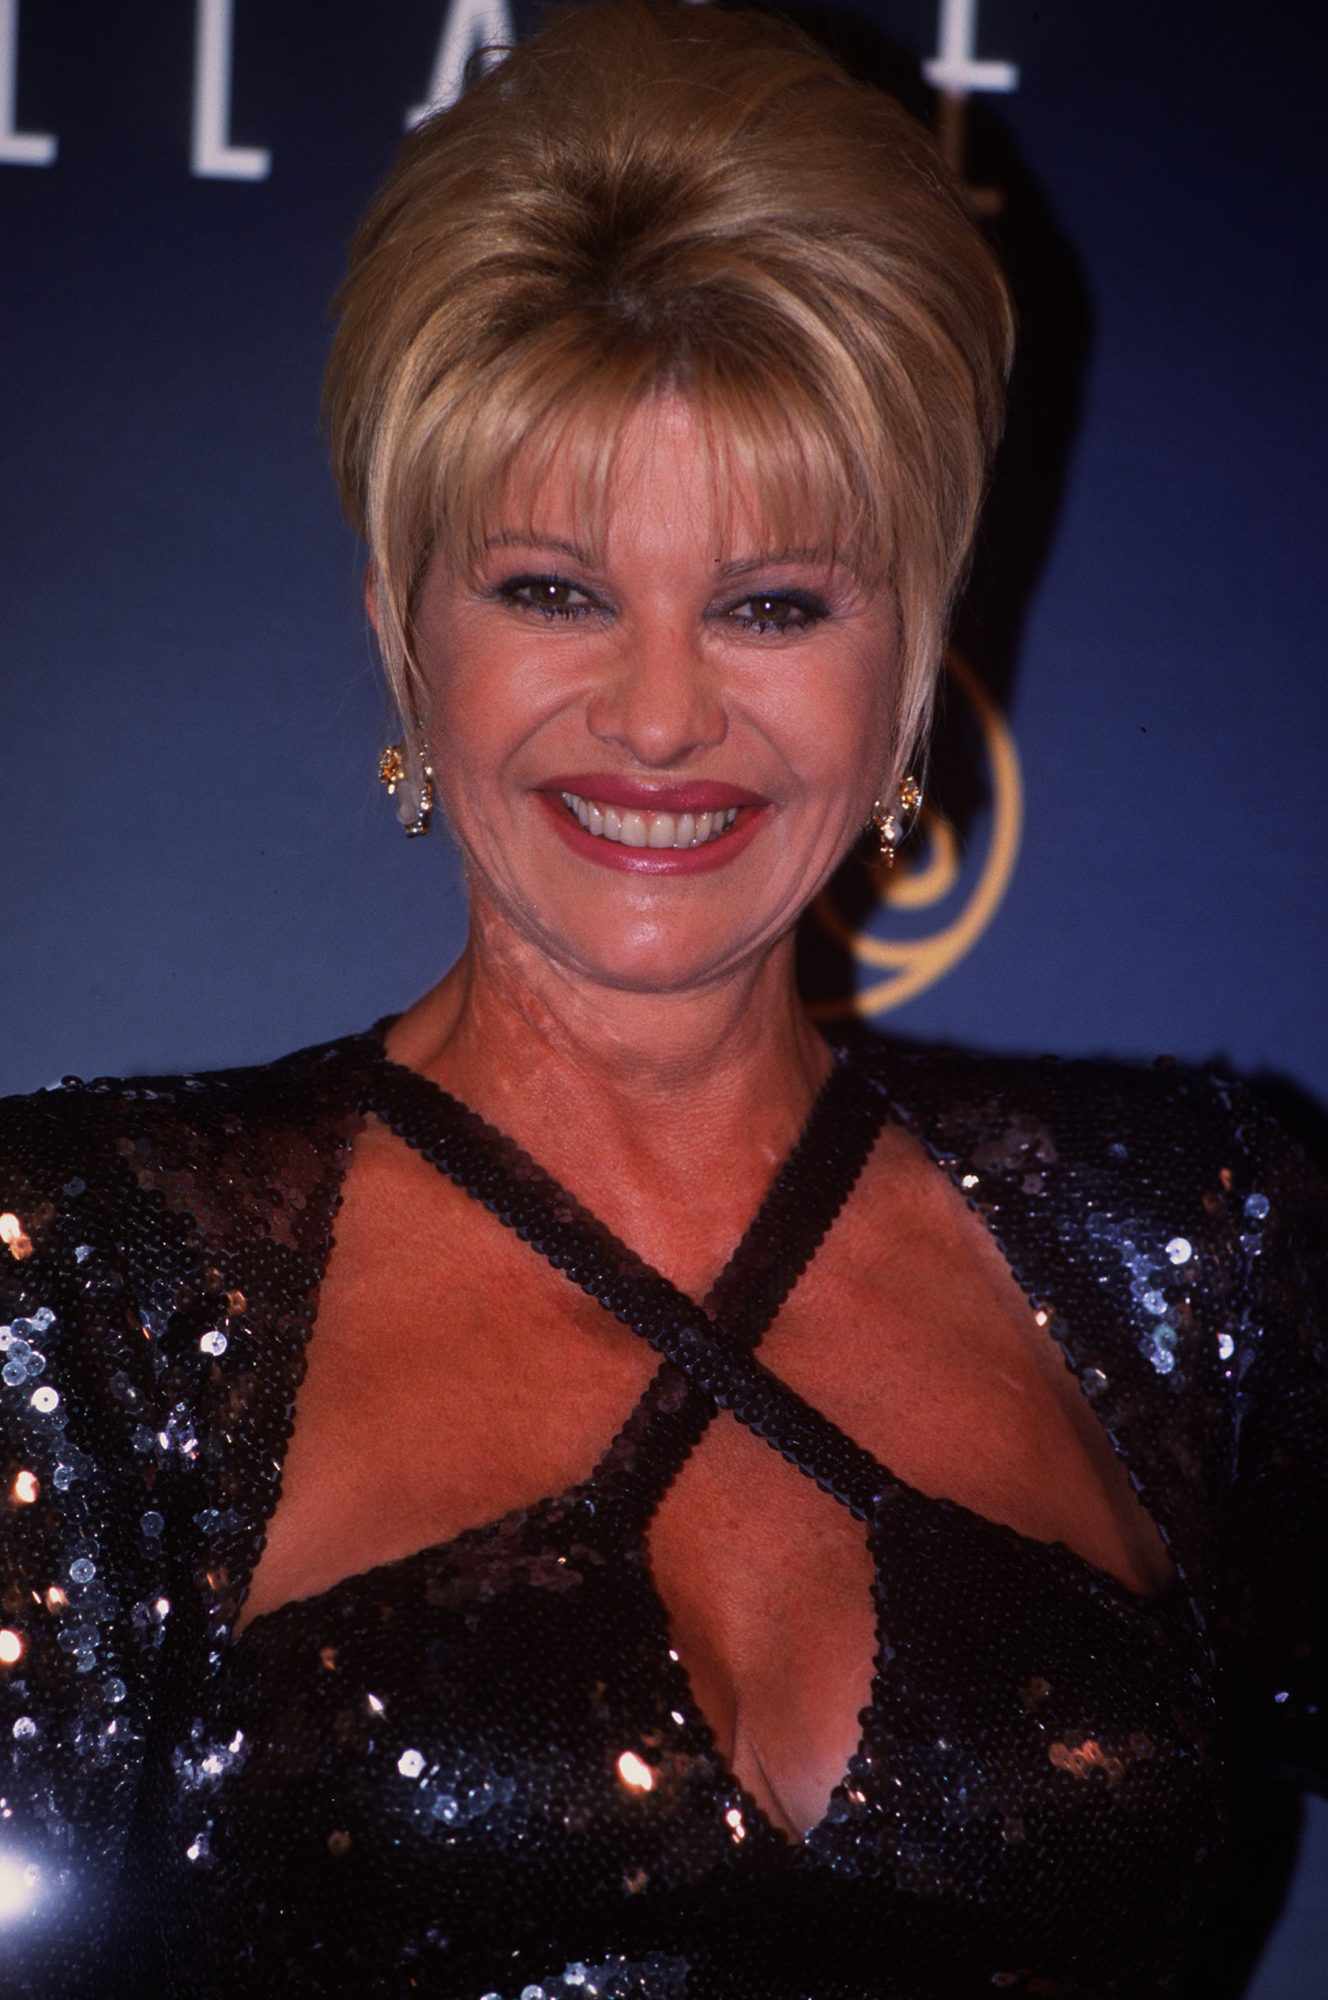 IVANA TRUMP IVANA TRUM DURING THE INAUGURATION OF A COMMERCIAL CENTER IN THE ROZAS..